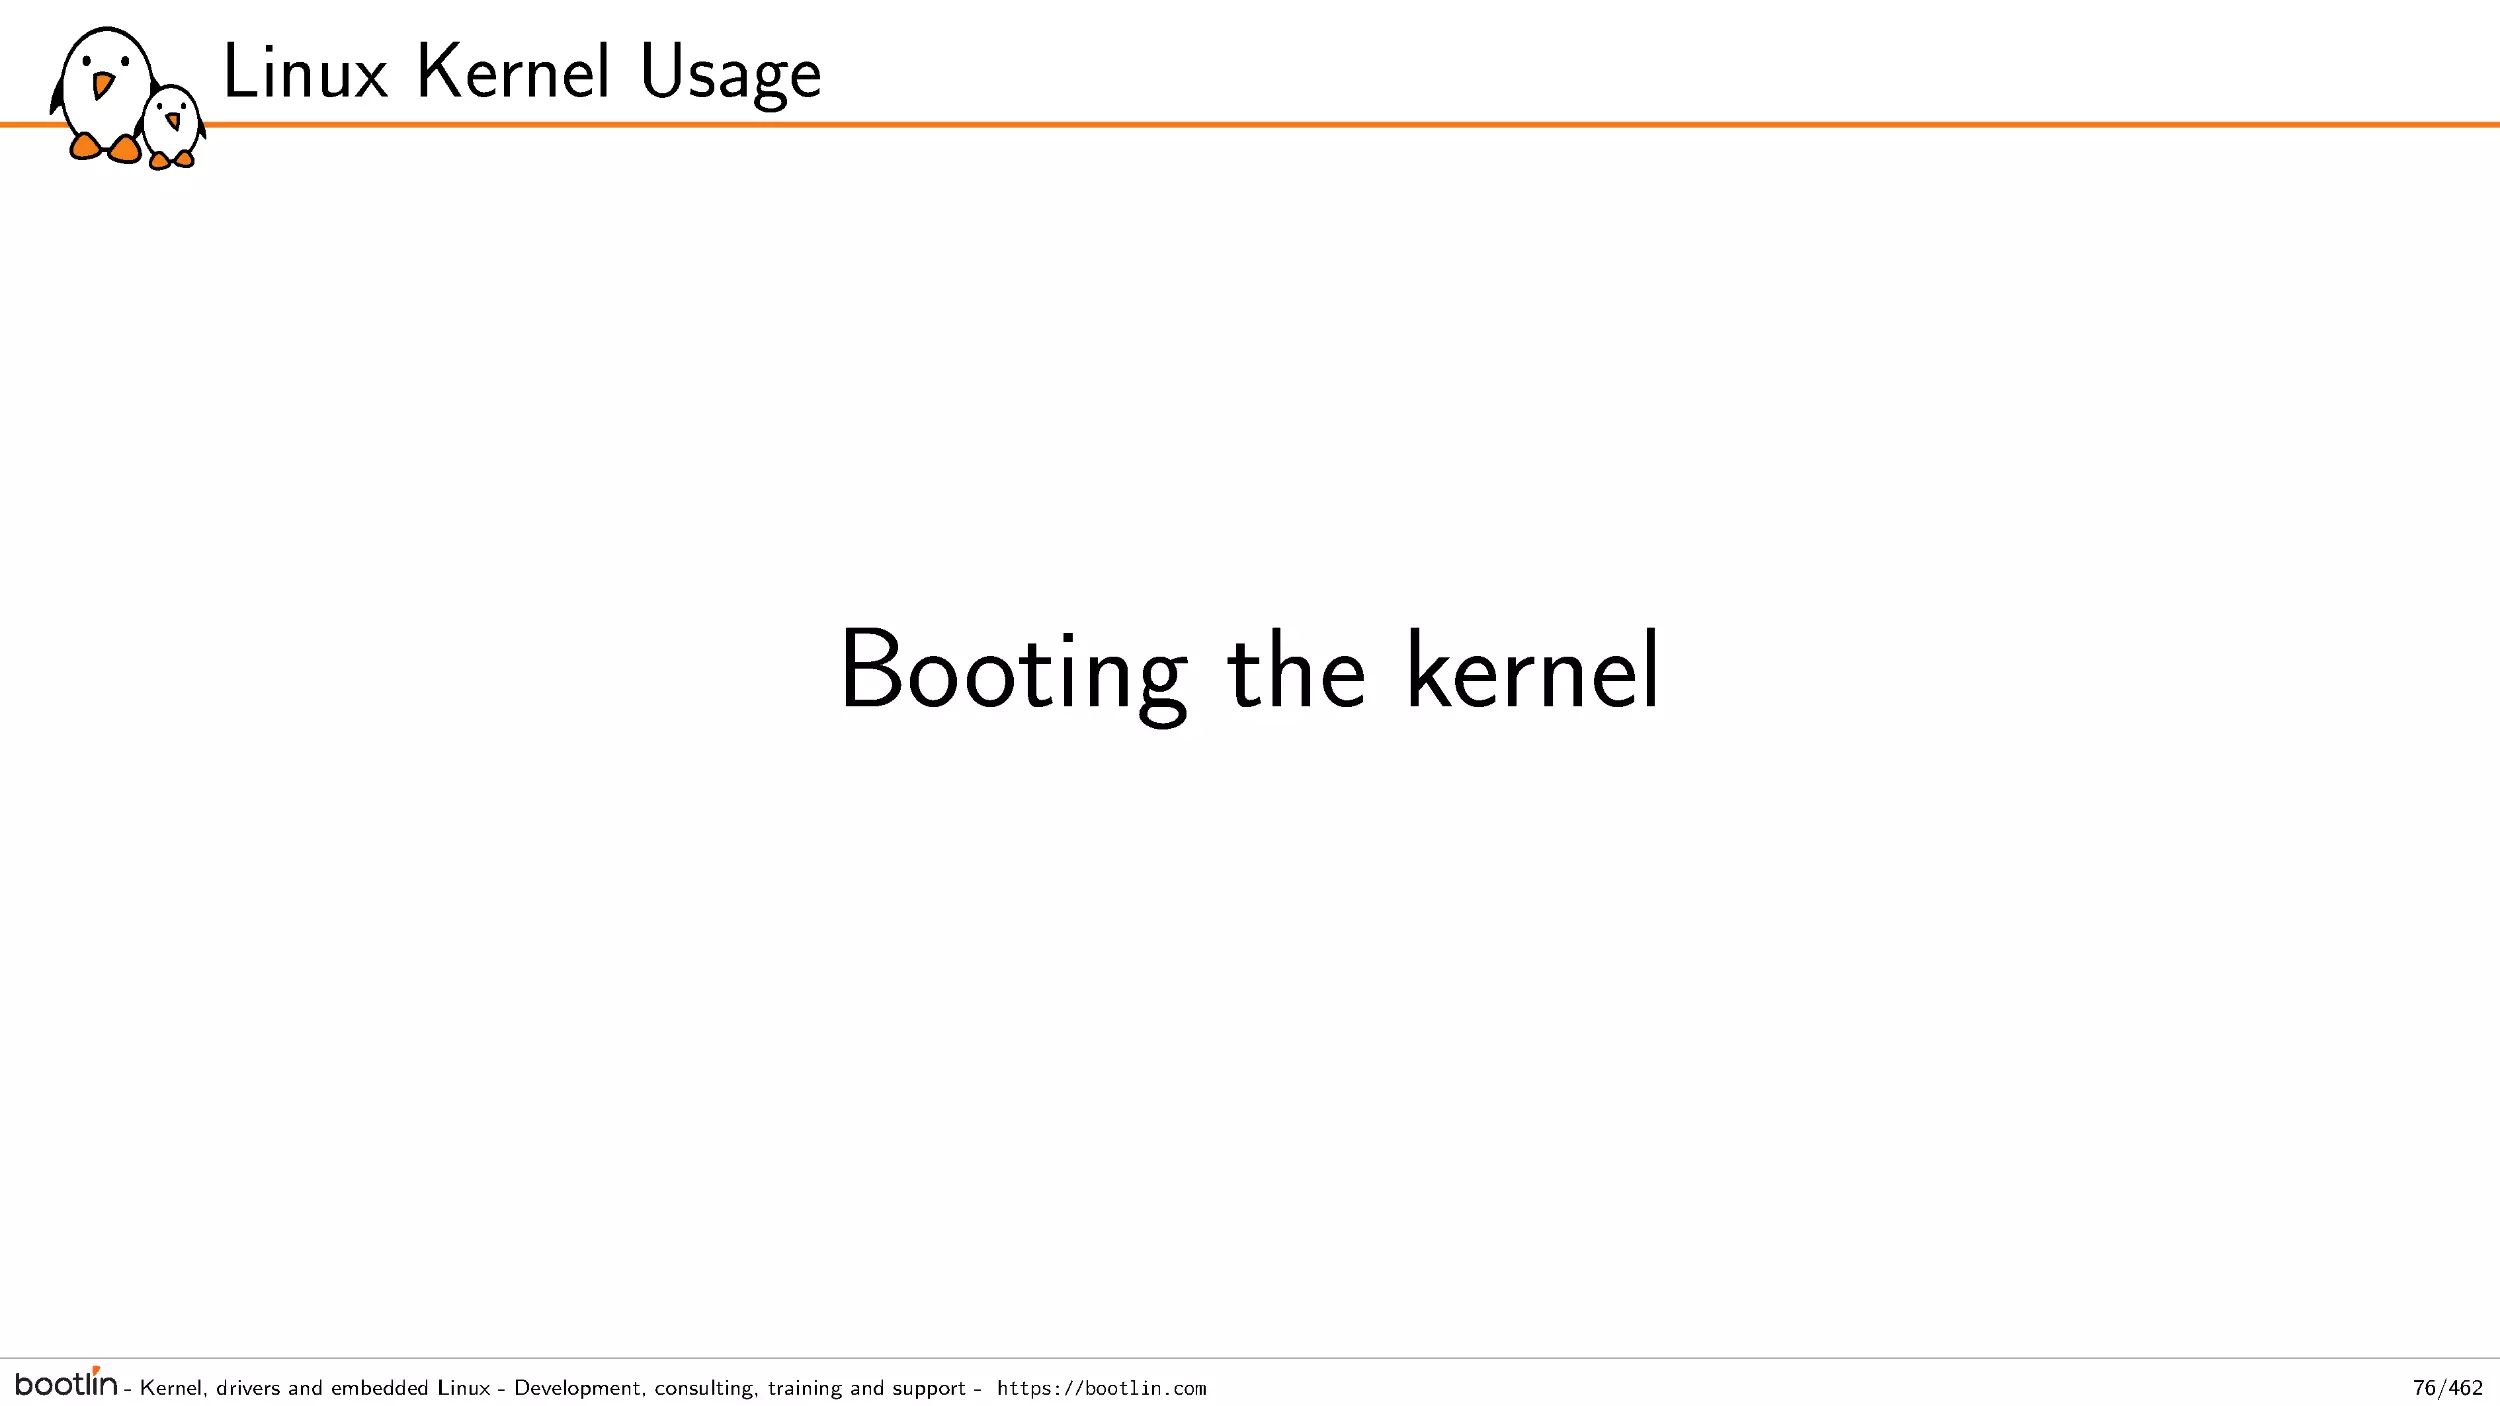 Booting the kernel